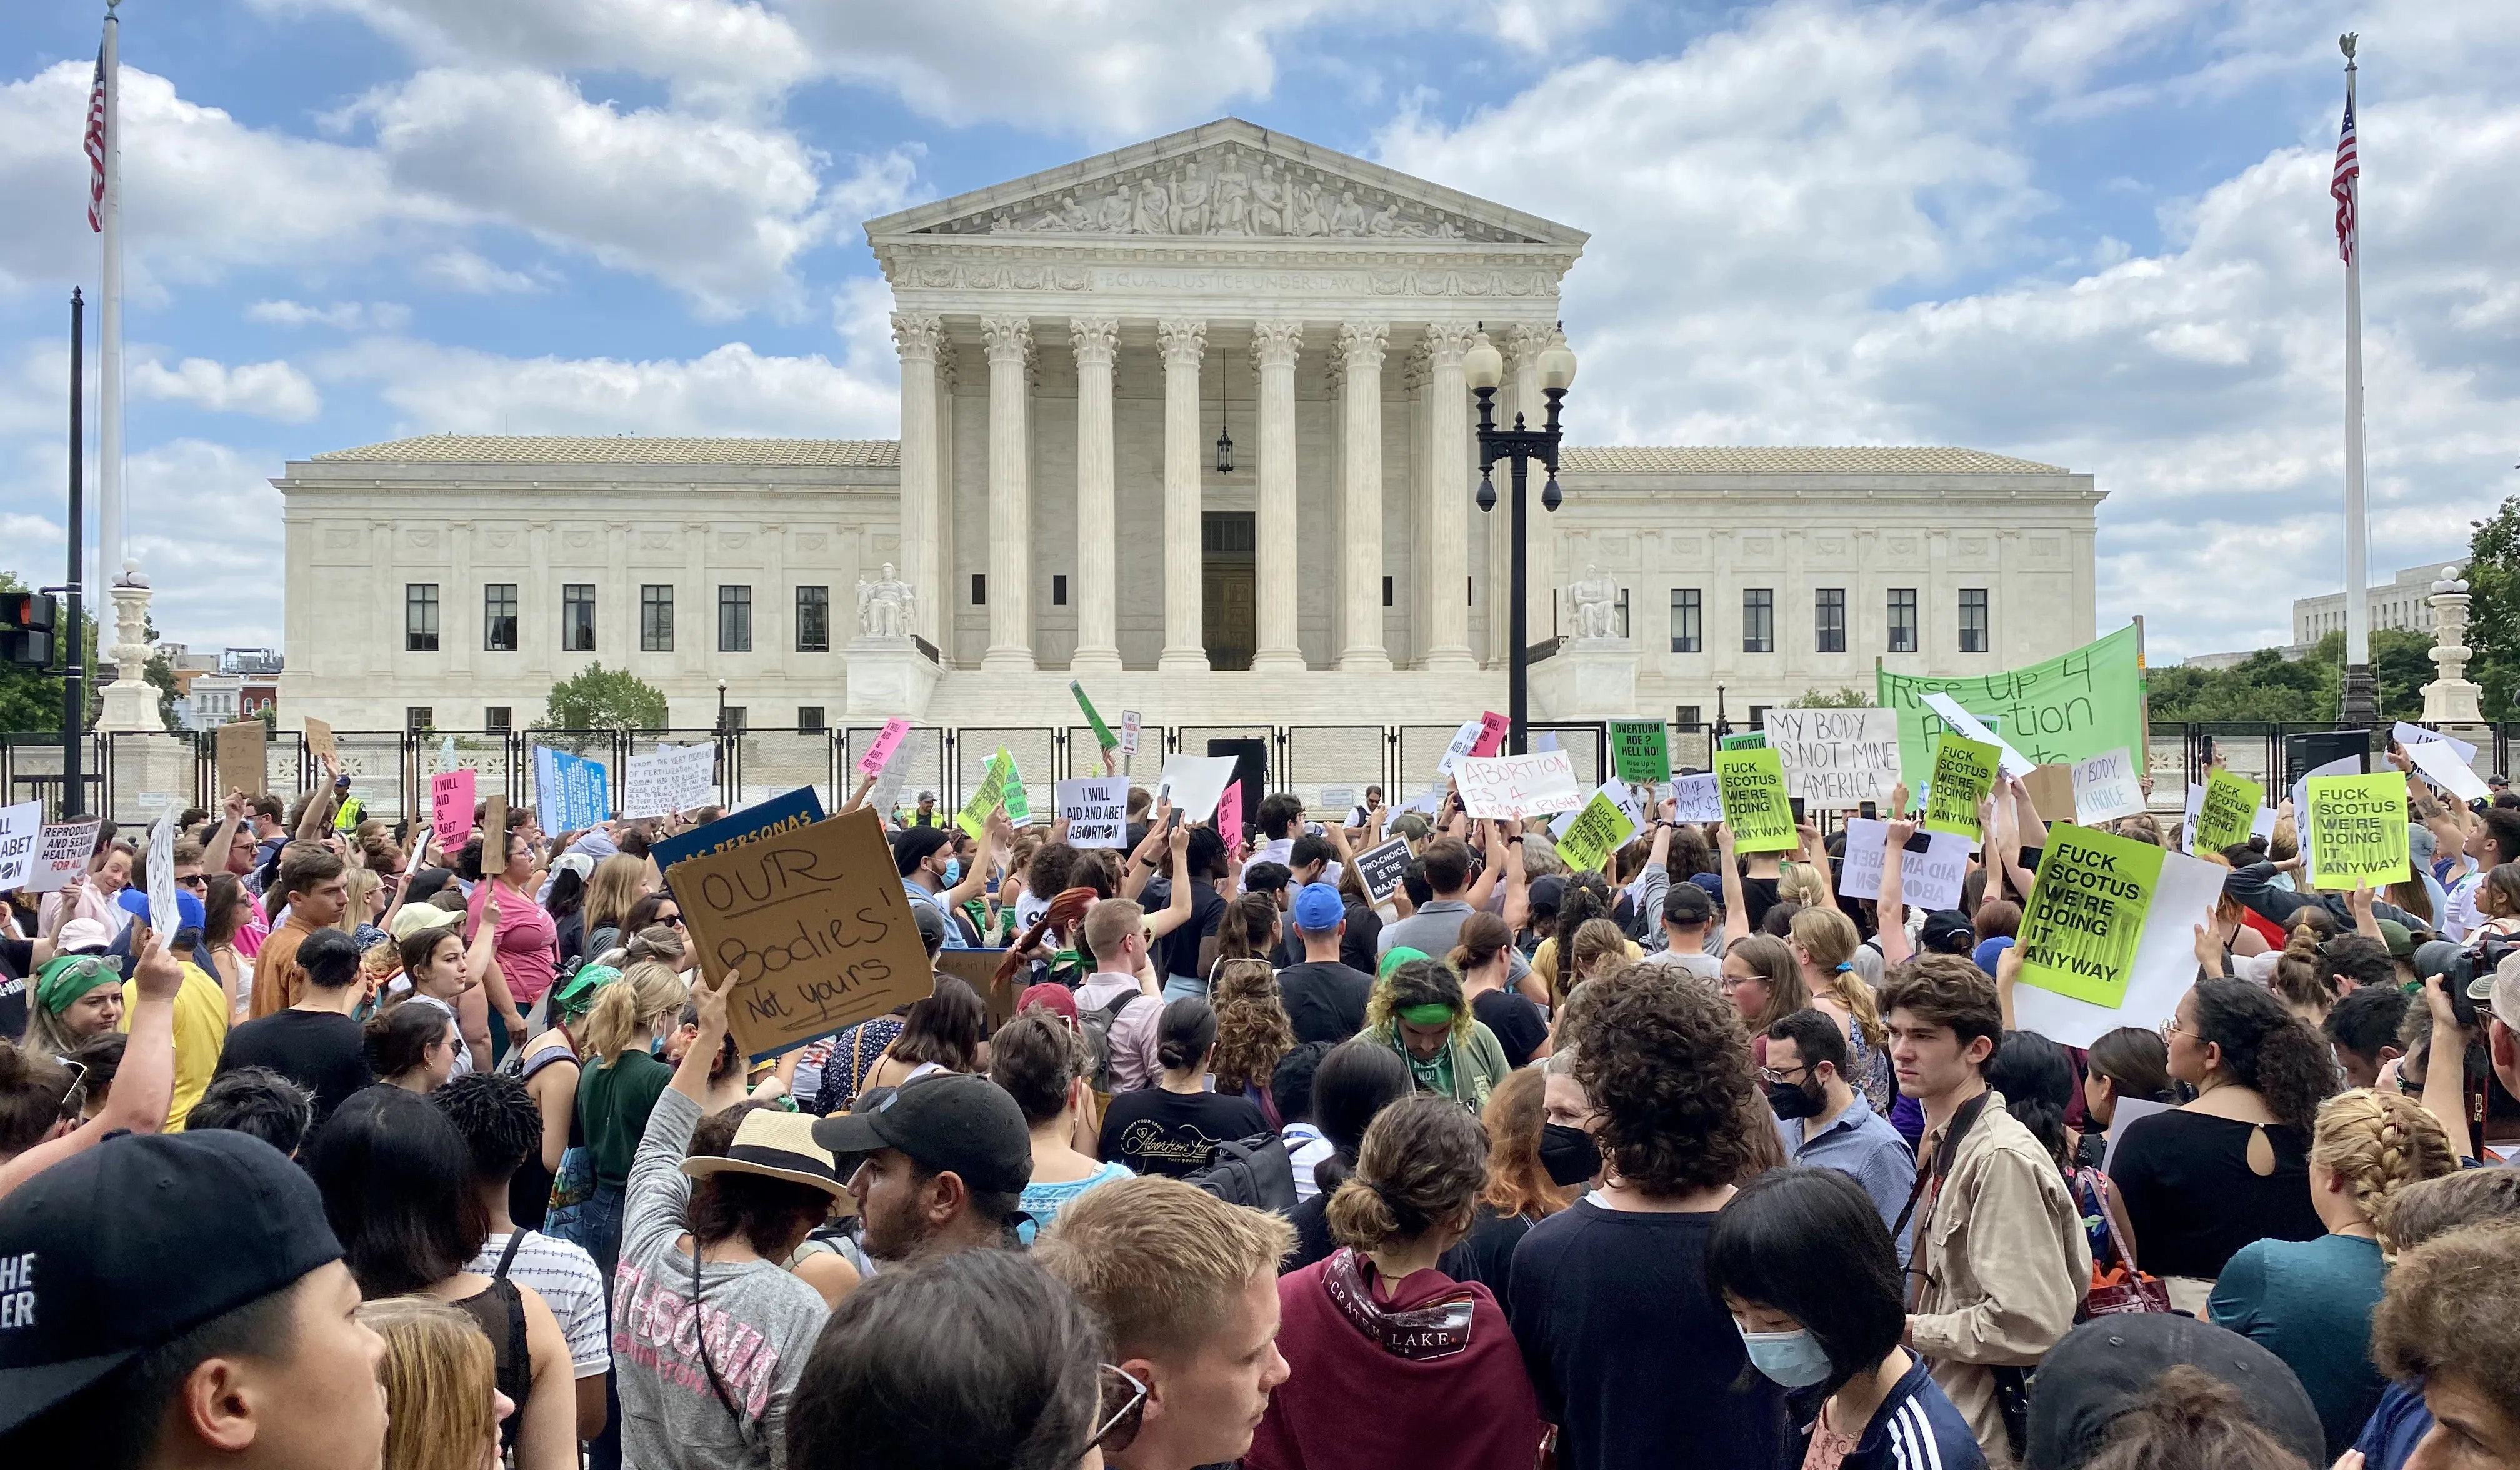 The scene outside the U.S. Supreme Court in Washington, D.C., after the court released its decision in the Dobbs abortion case on June 24, 2022.?w=200&h=150